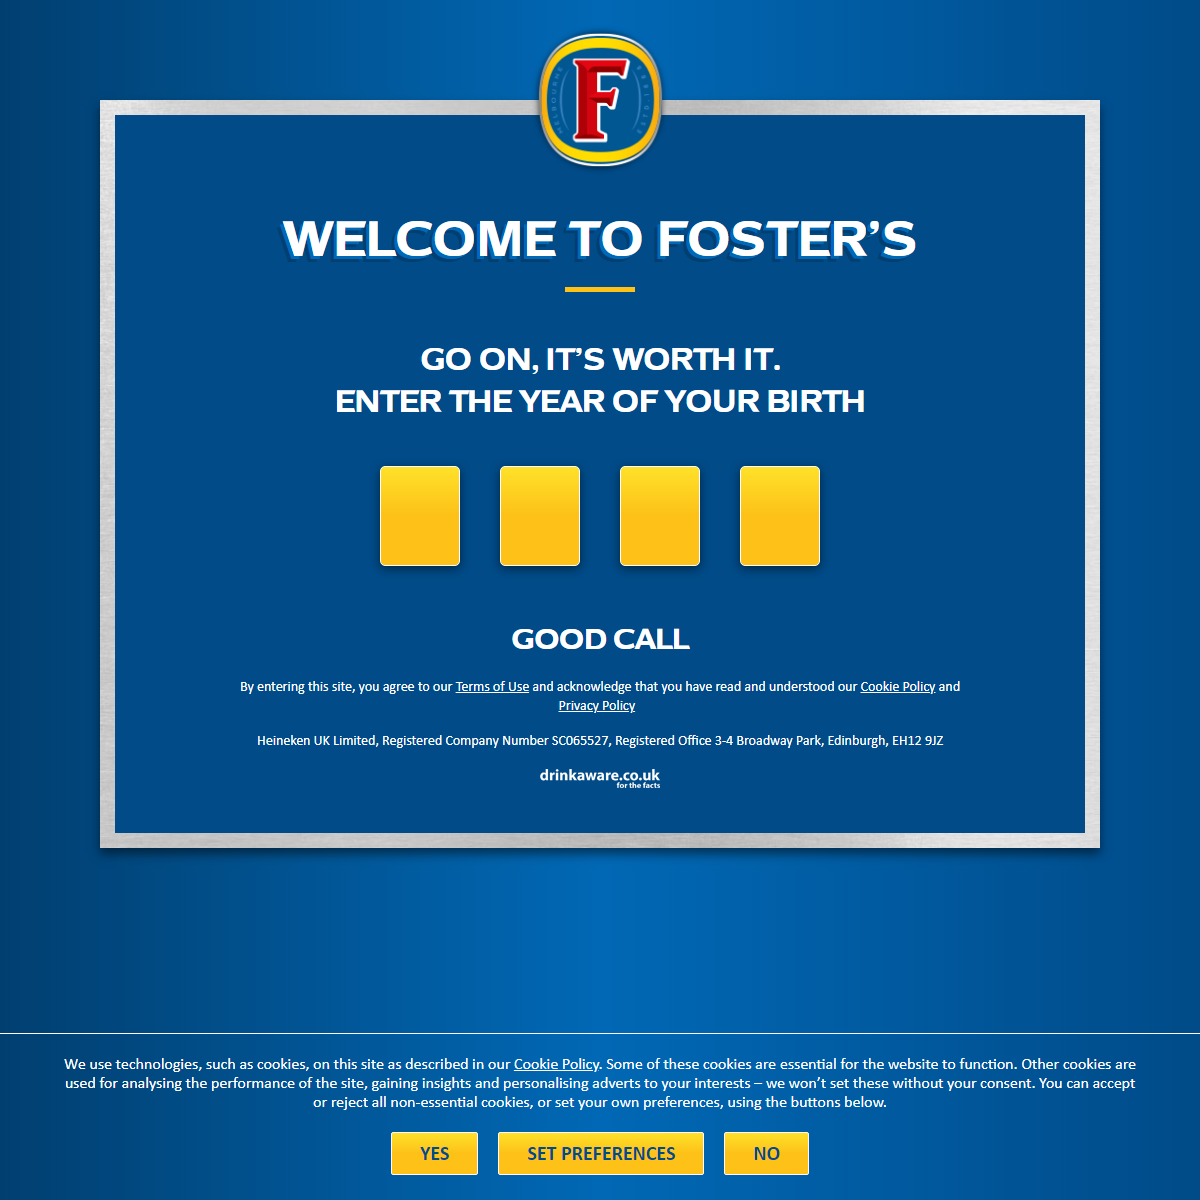 A complete backup of https://www.fosters.co.uk/